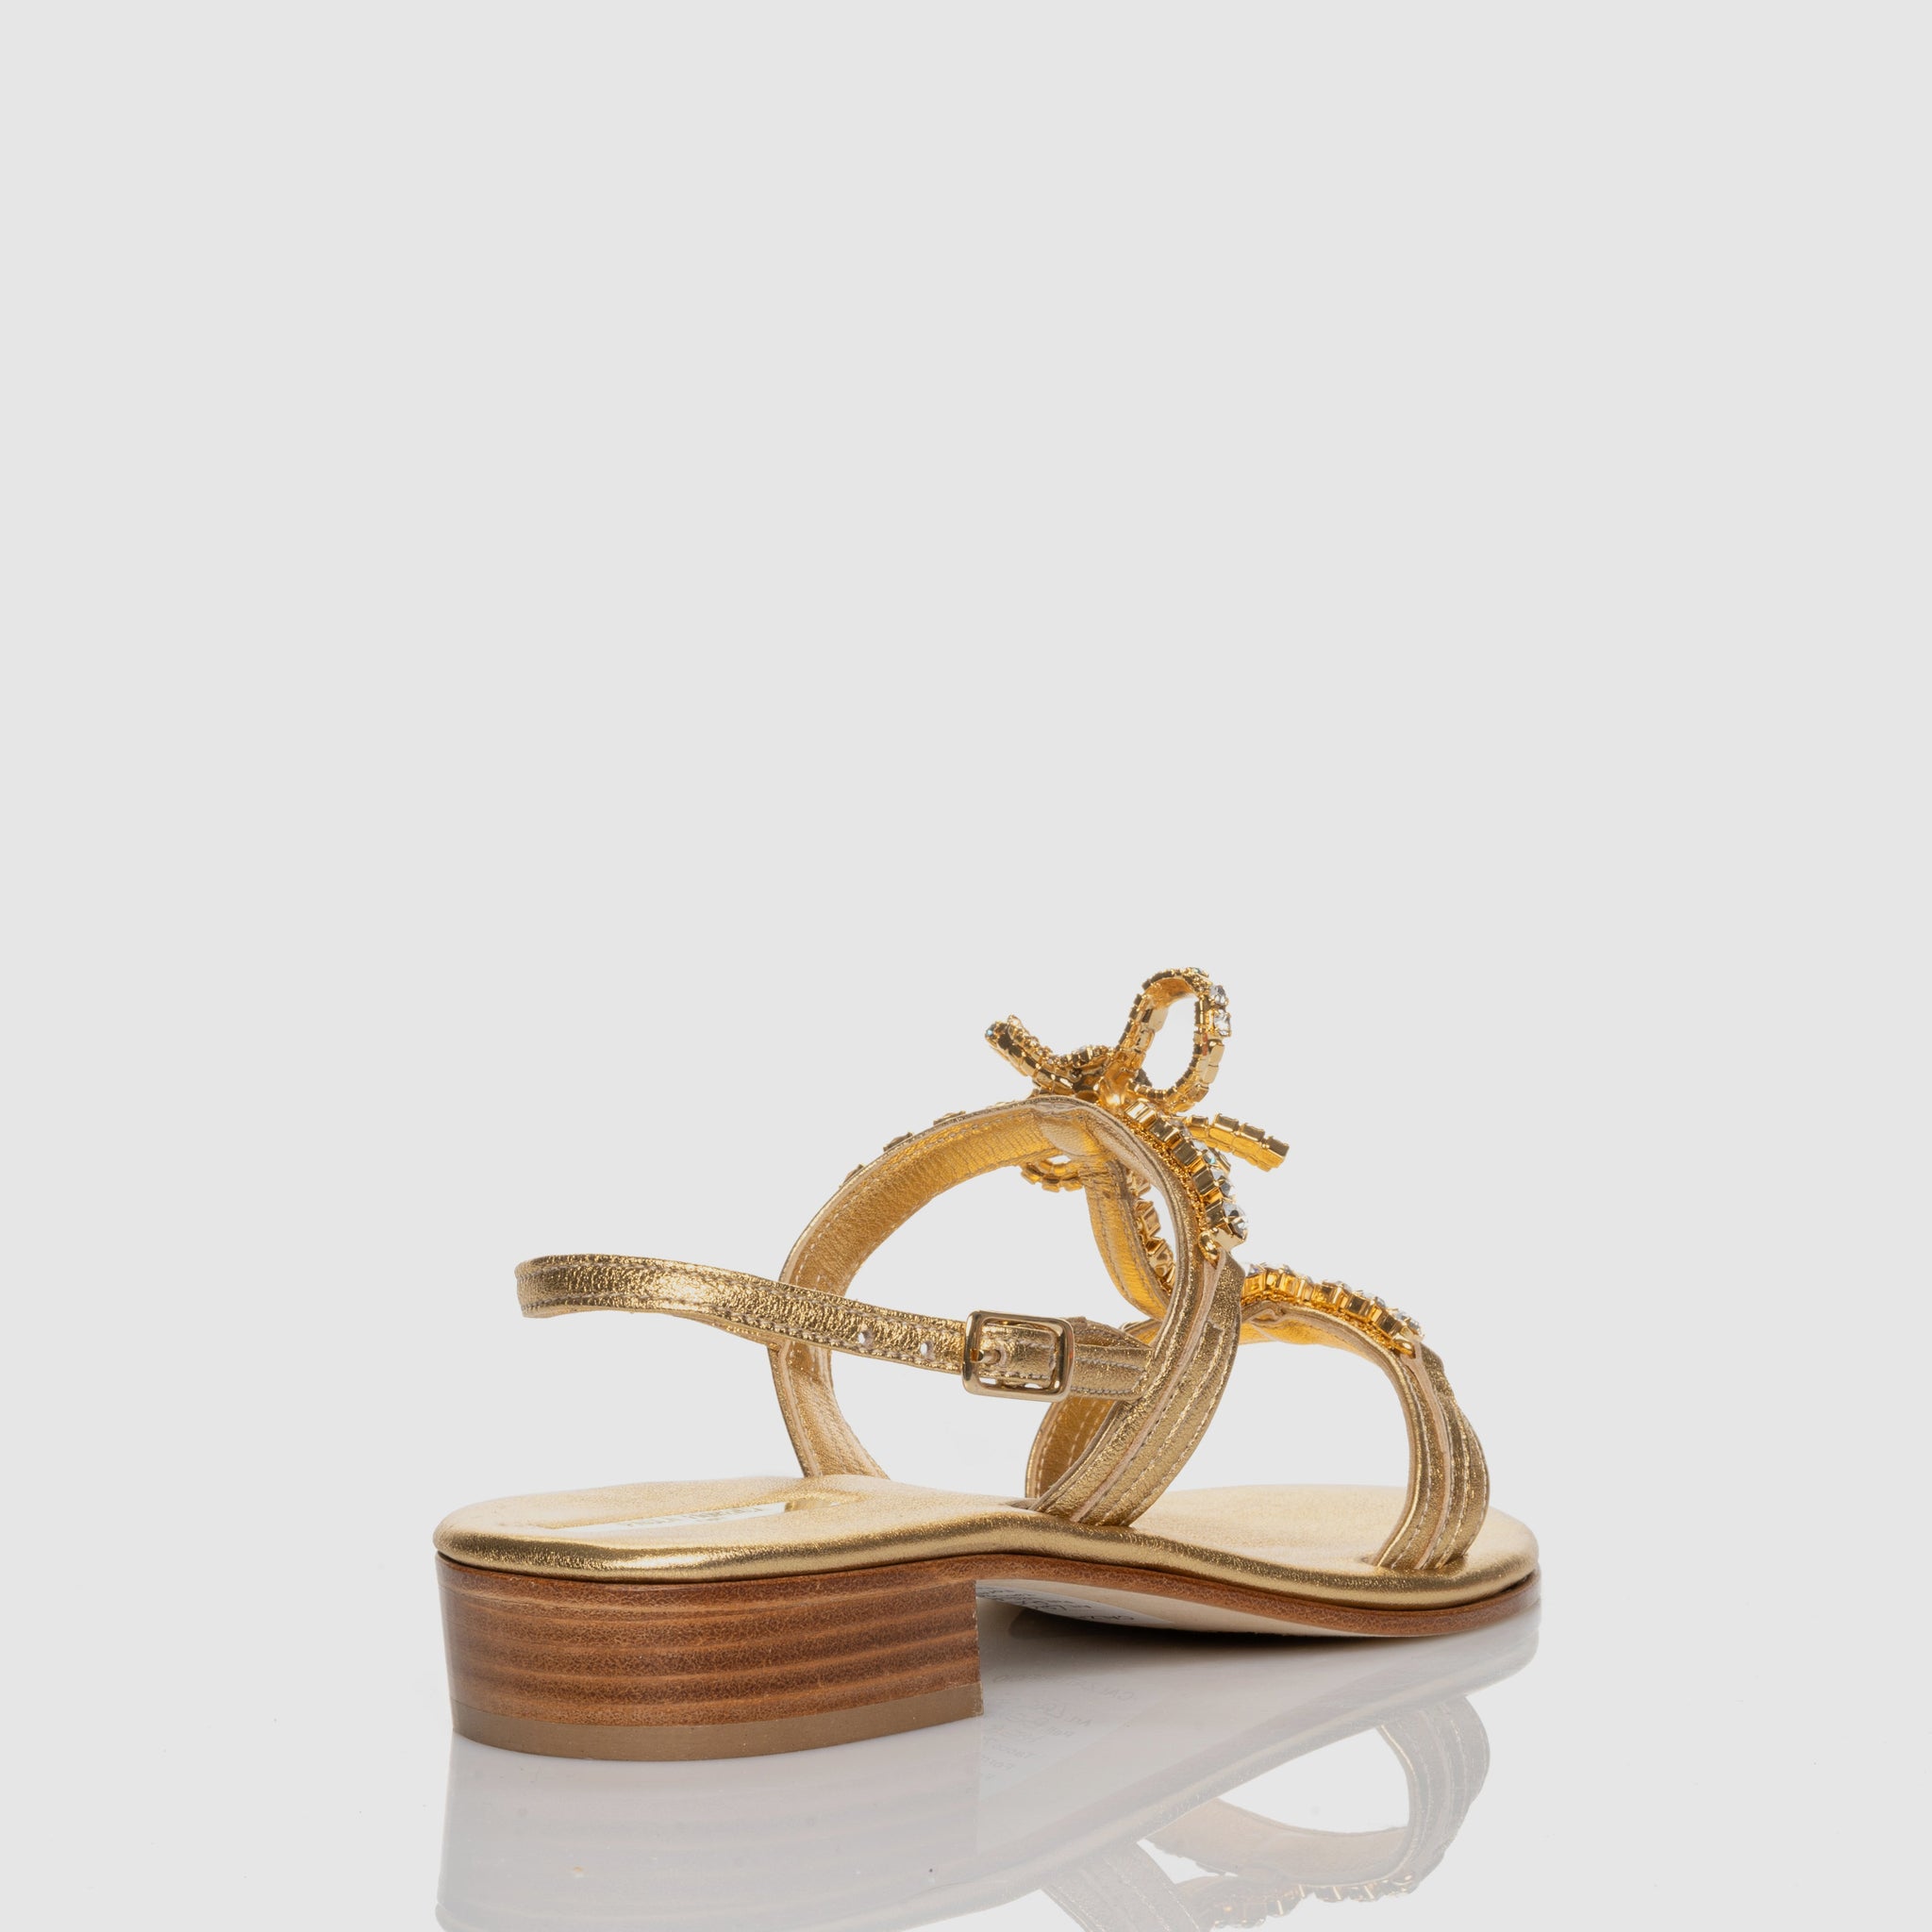 Bright Bow Gold High Heel Sandal in Nappa with bow-themed crystals